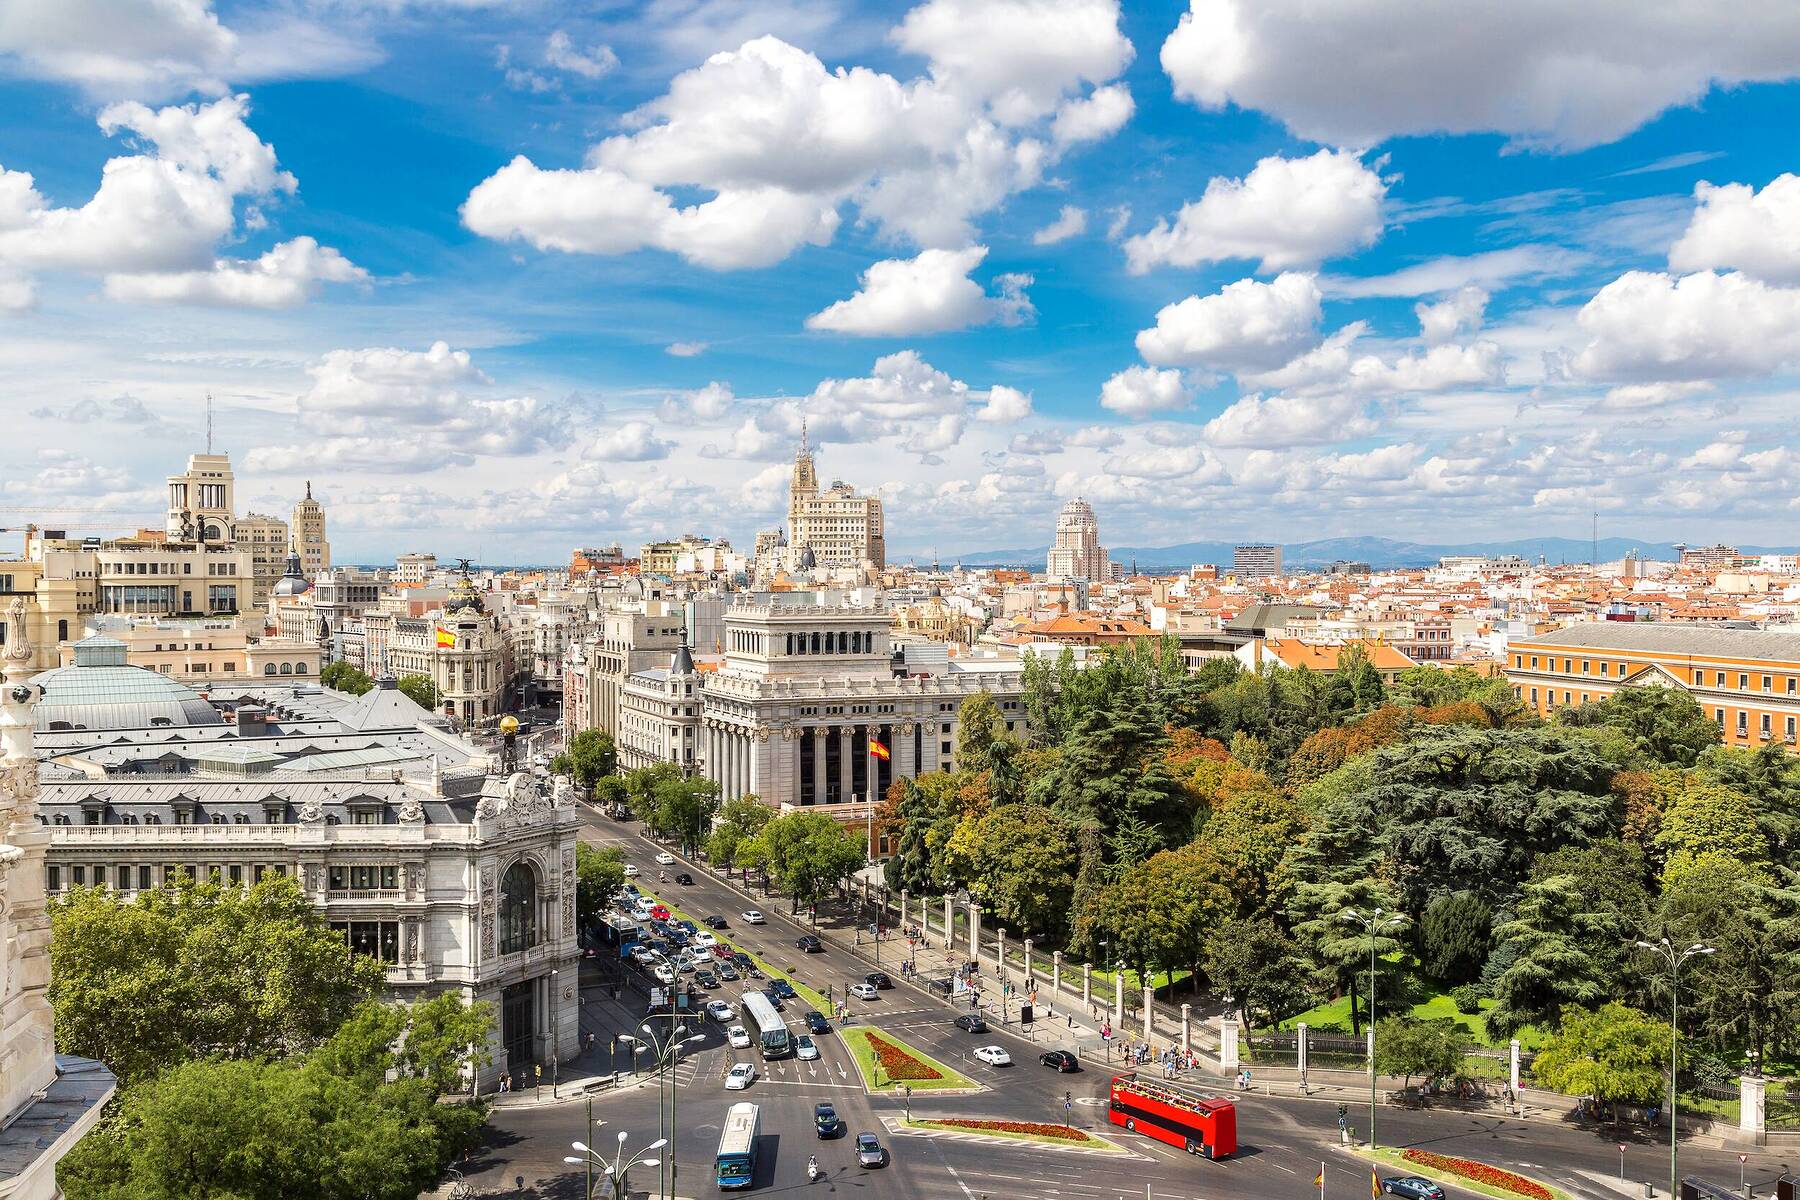 The squares of Madrid, Spain